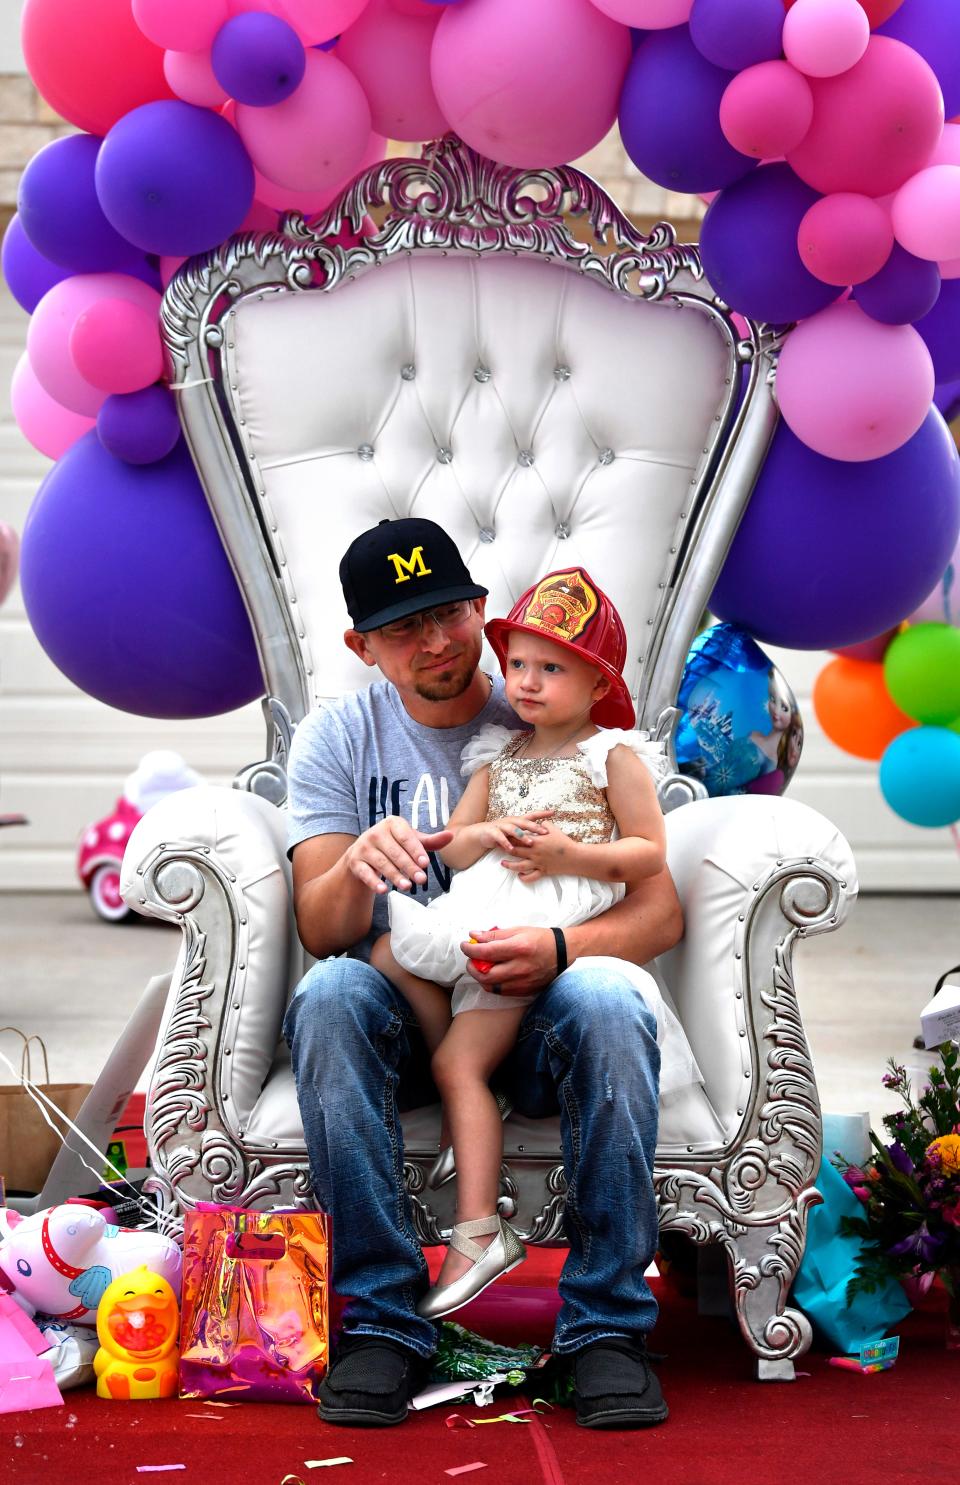 Tony Molina sits with his daughter Sienna in a donated throne on the family driveway during the parade for her Oct. 3. Hundreds rallied in south Abilene to show support for three-year-old Sienna in the wake of her terminal cancer prognosis days earlier.